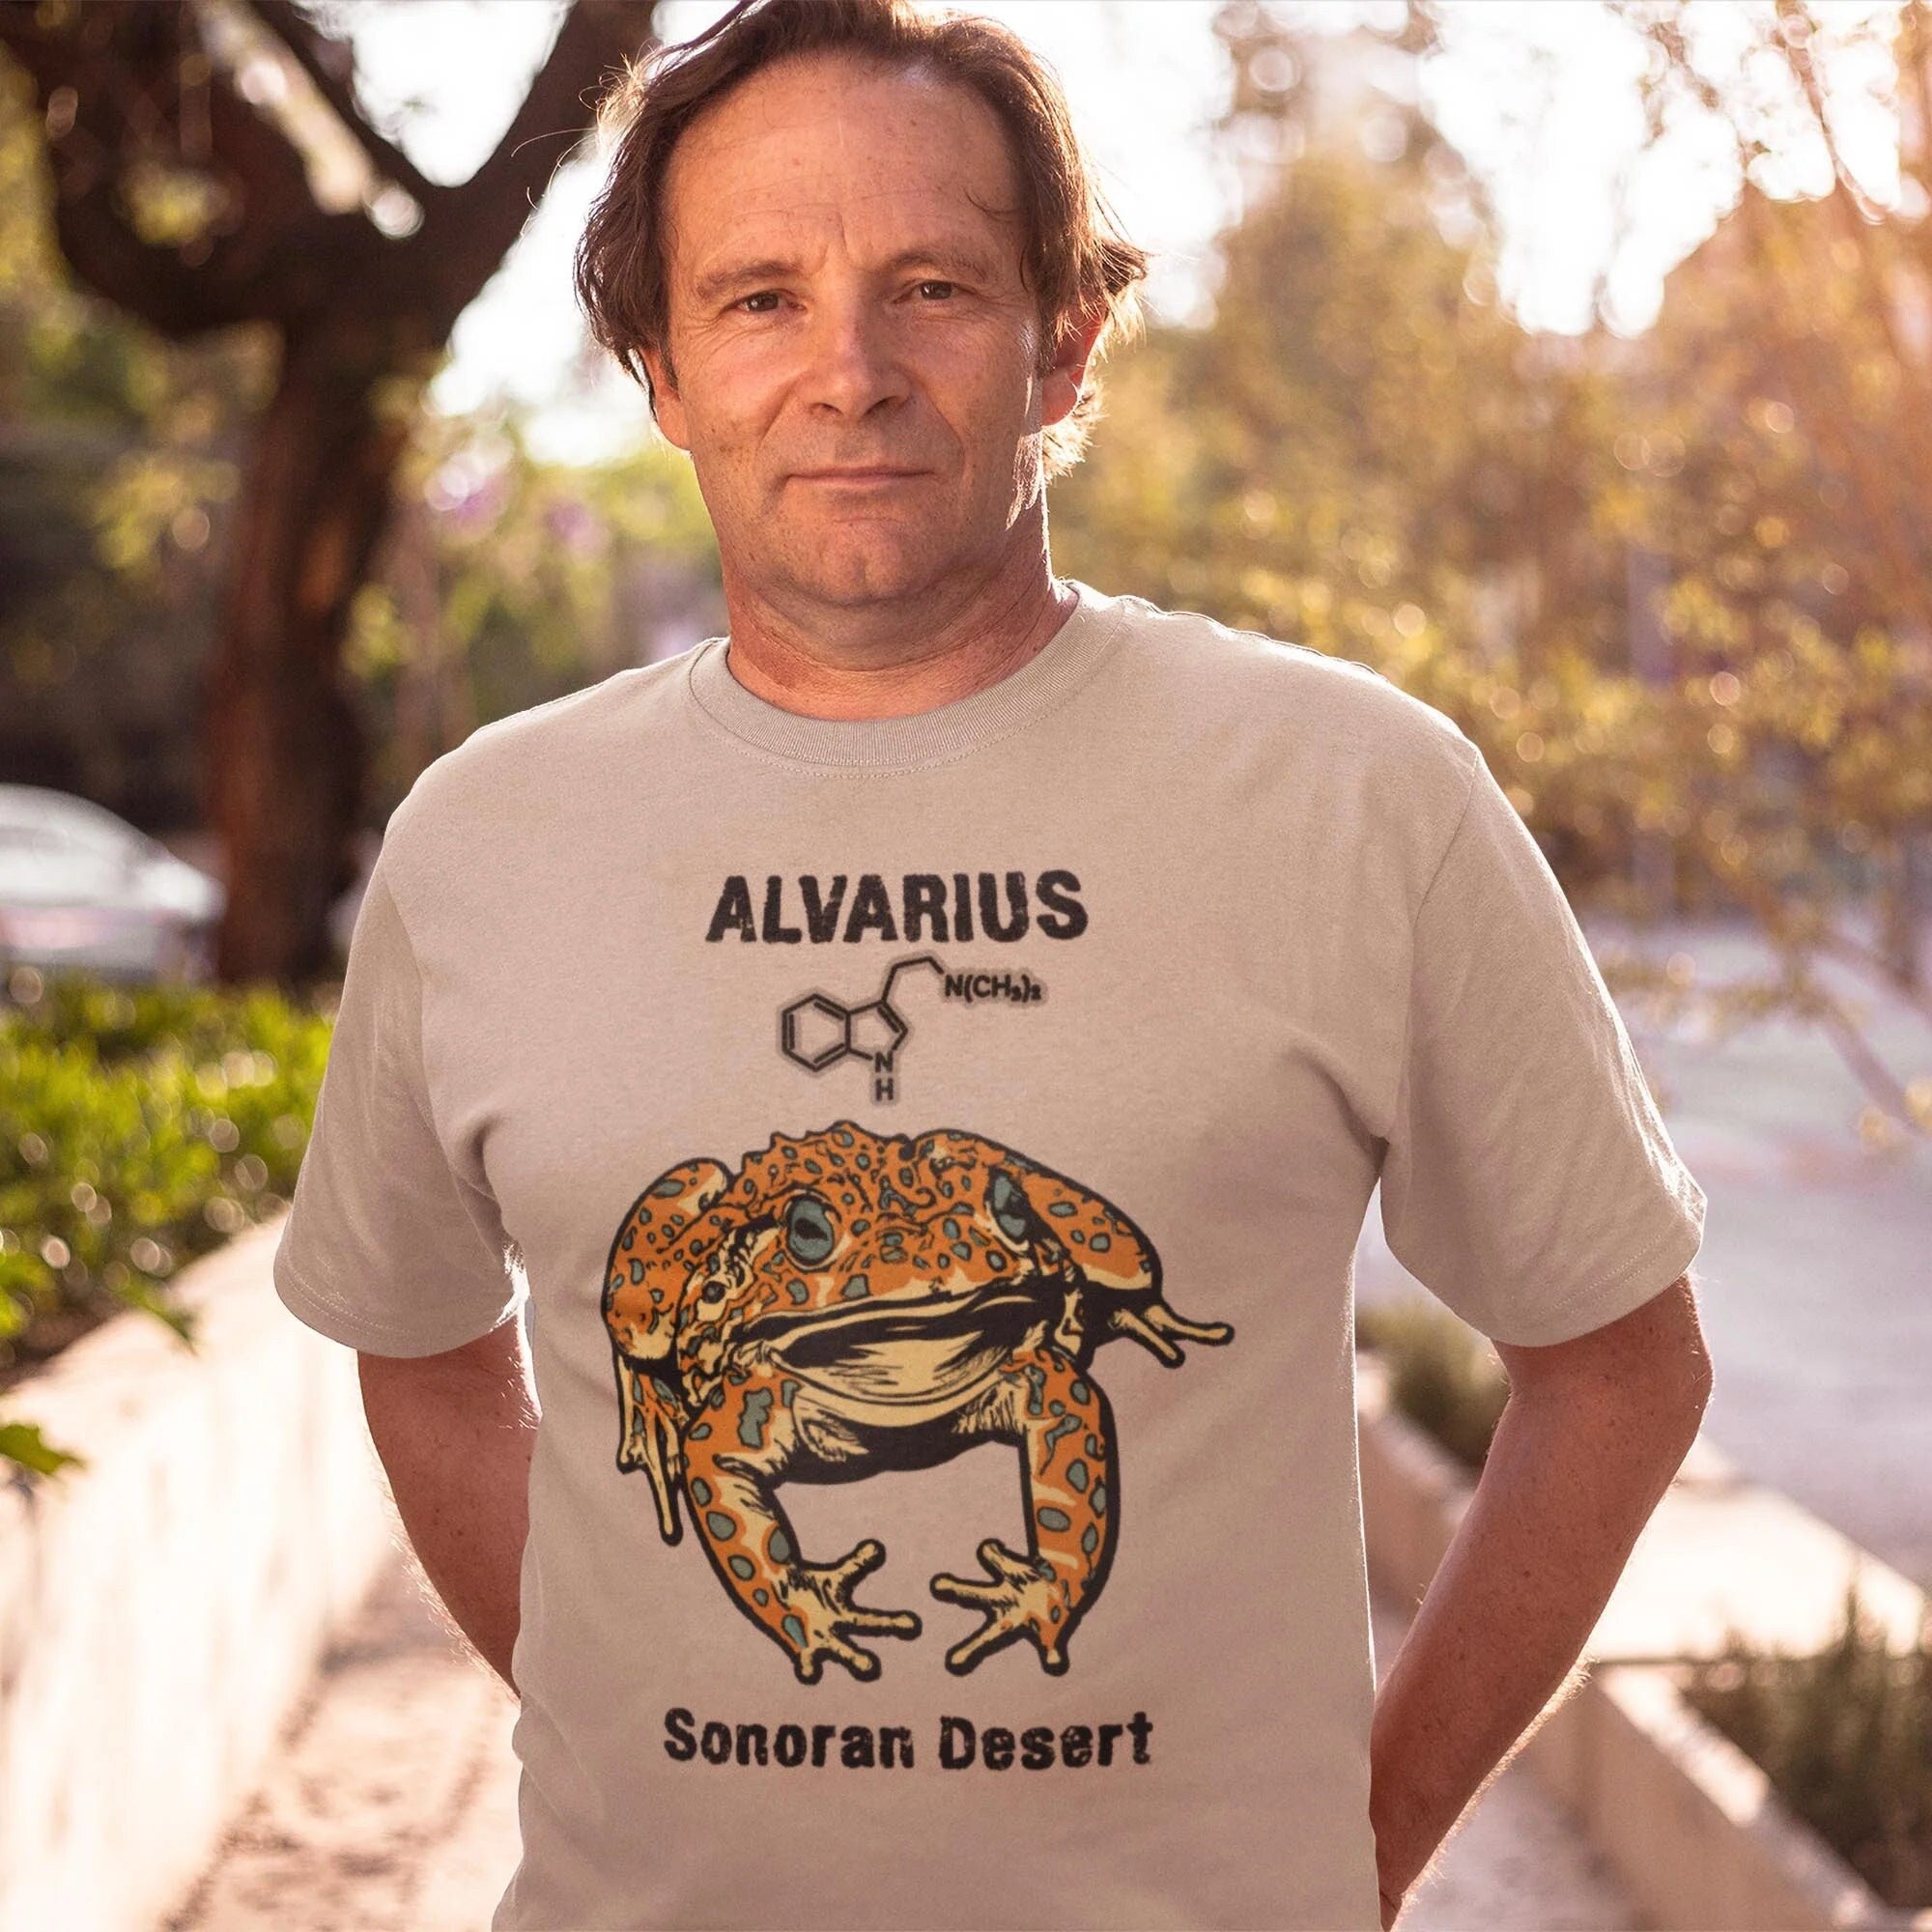 Bufo Alvarius Toad, The Sonoran Desert 5-MeO DMT Psychedelic Frog, Trippy Ayahuasca Weed Chemistry | 420 Spiritual Digital Art T-Shirt Tee